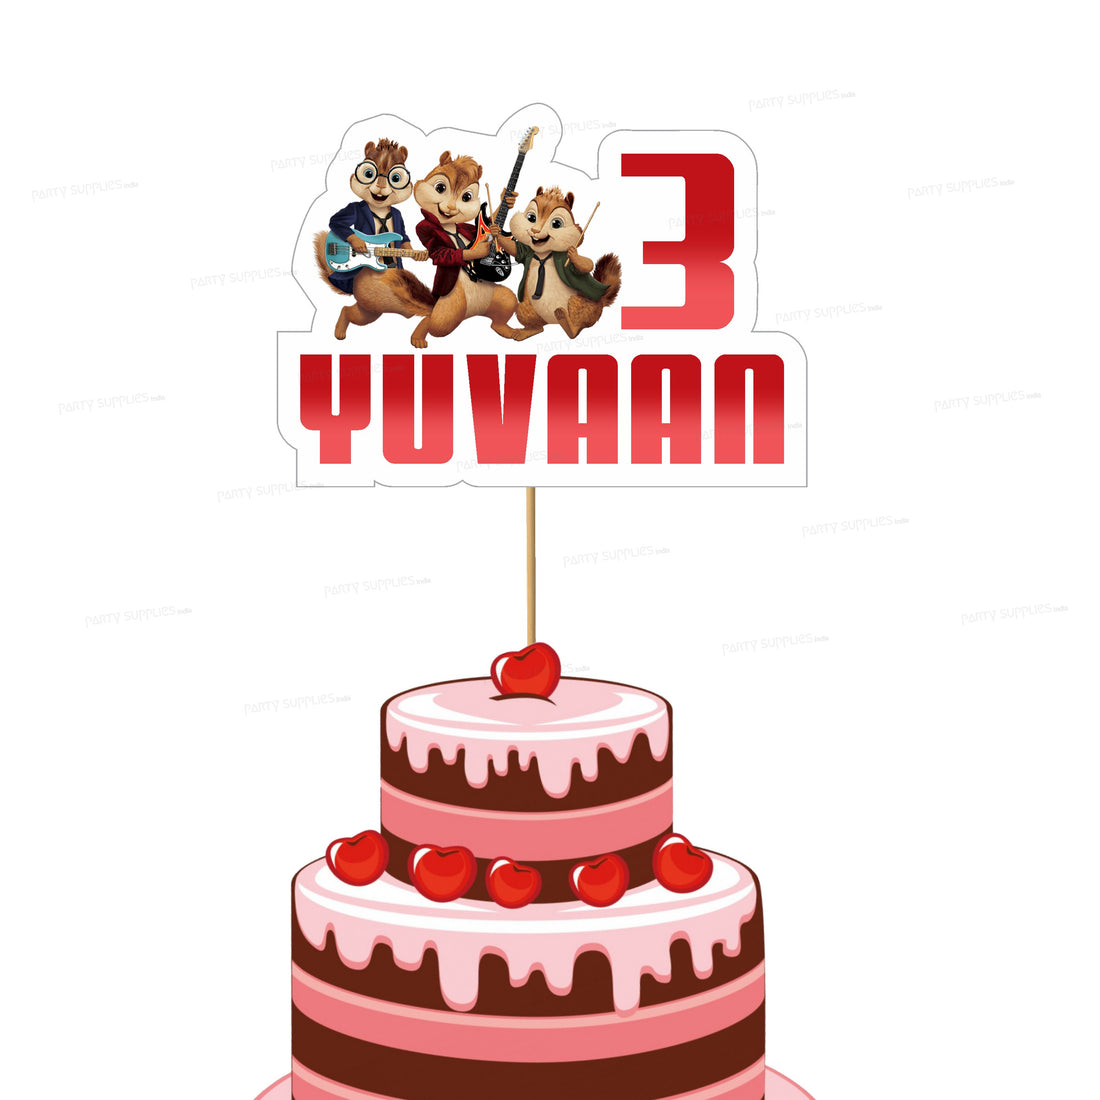 PSI Alvin and Chipmunks Theme Customized Cake Topper